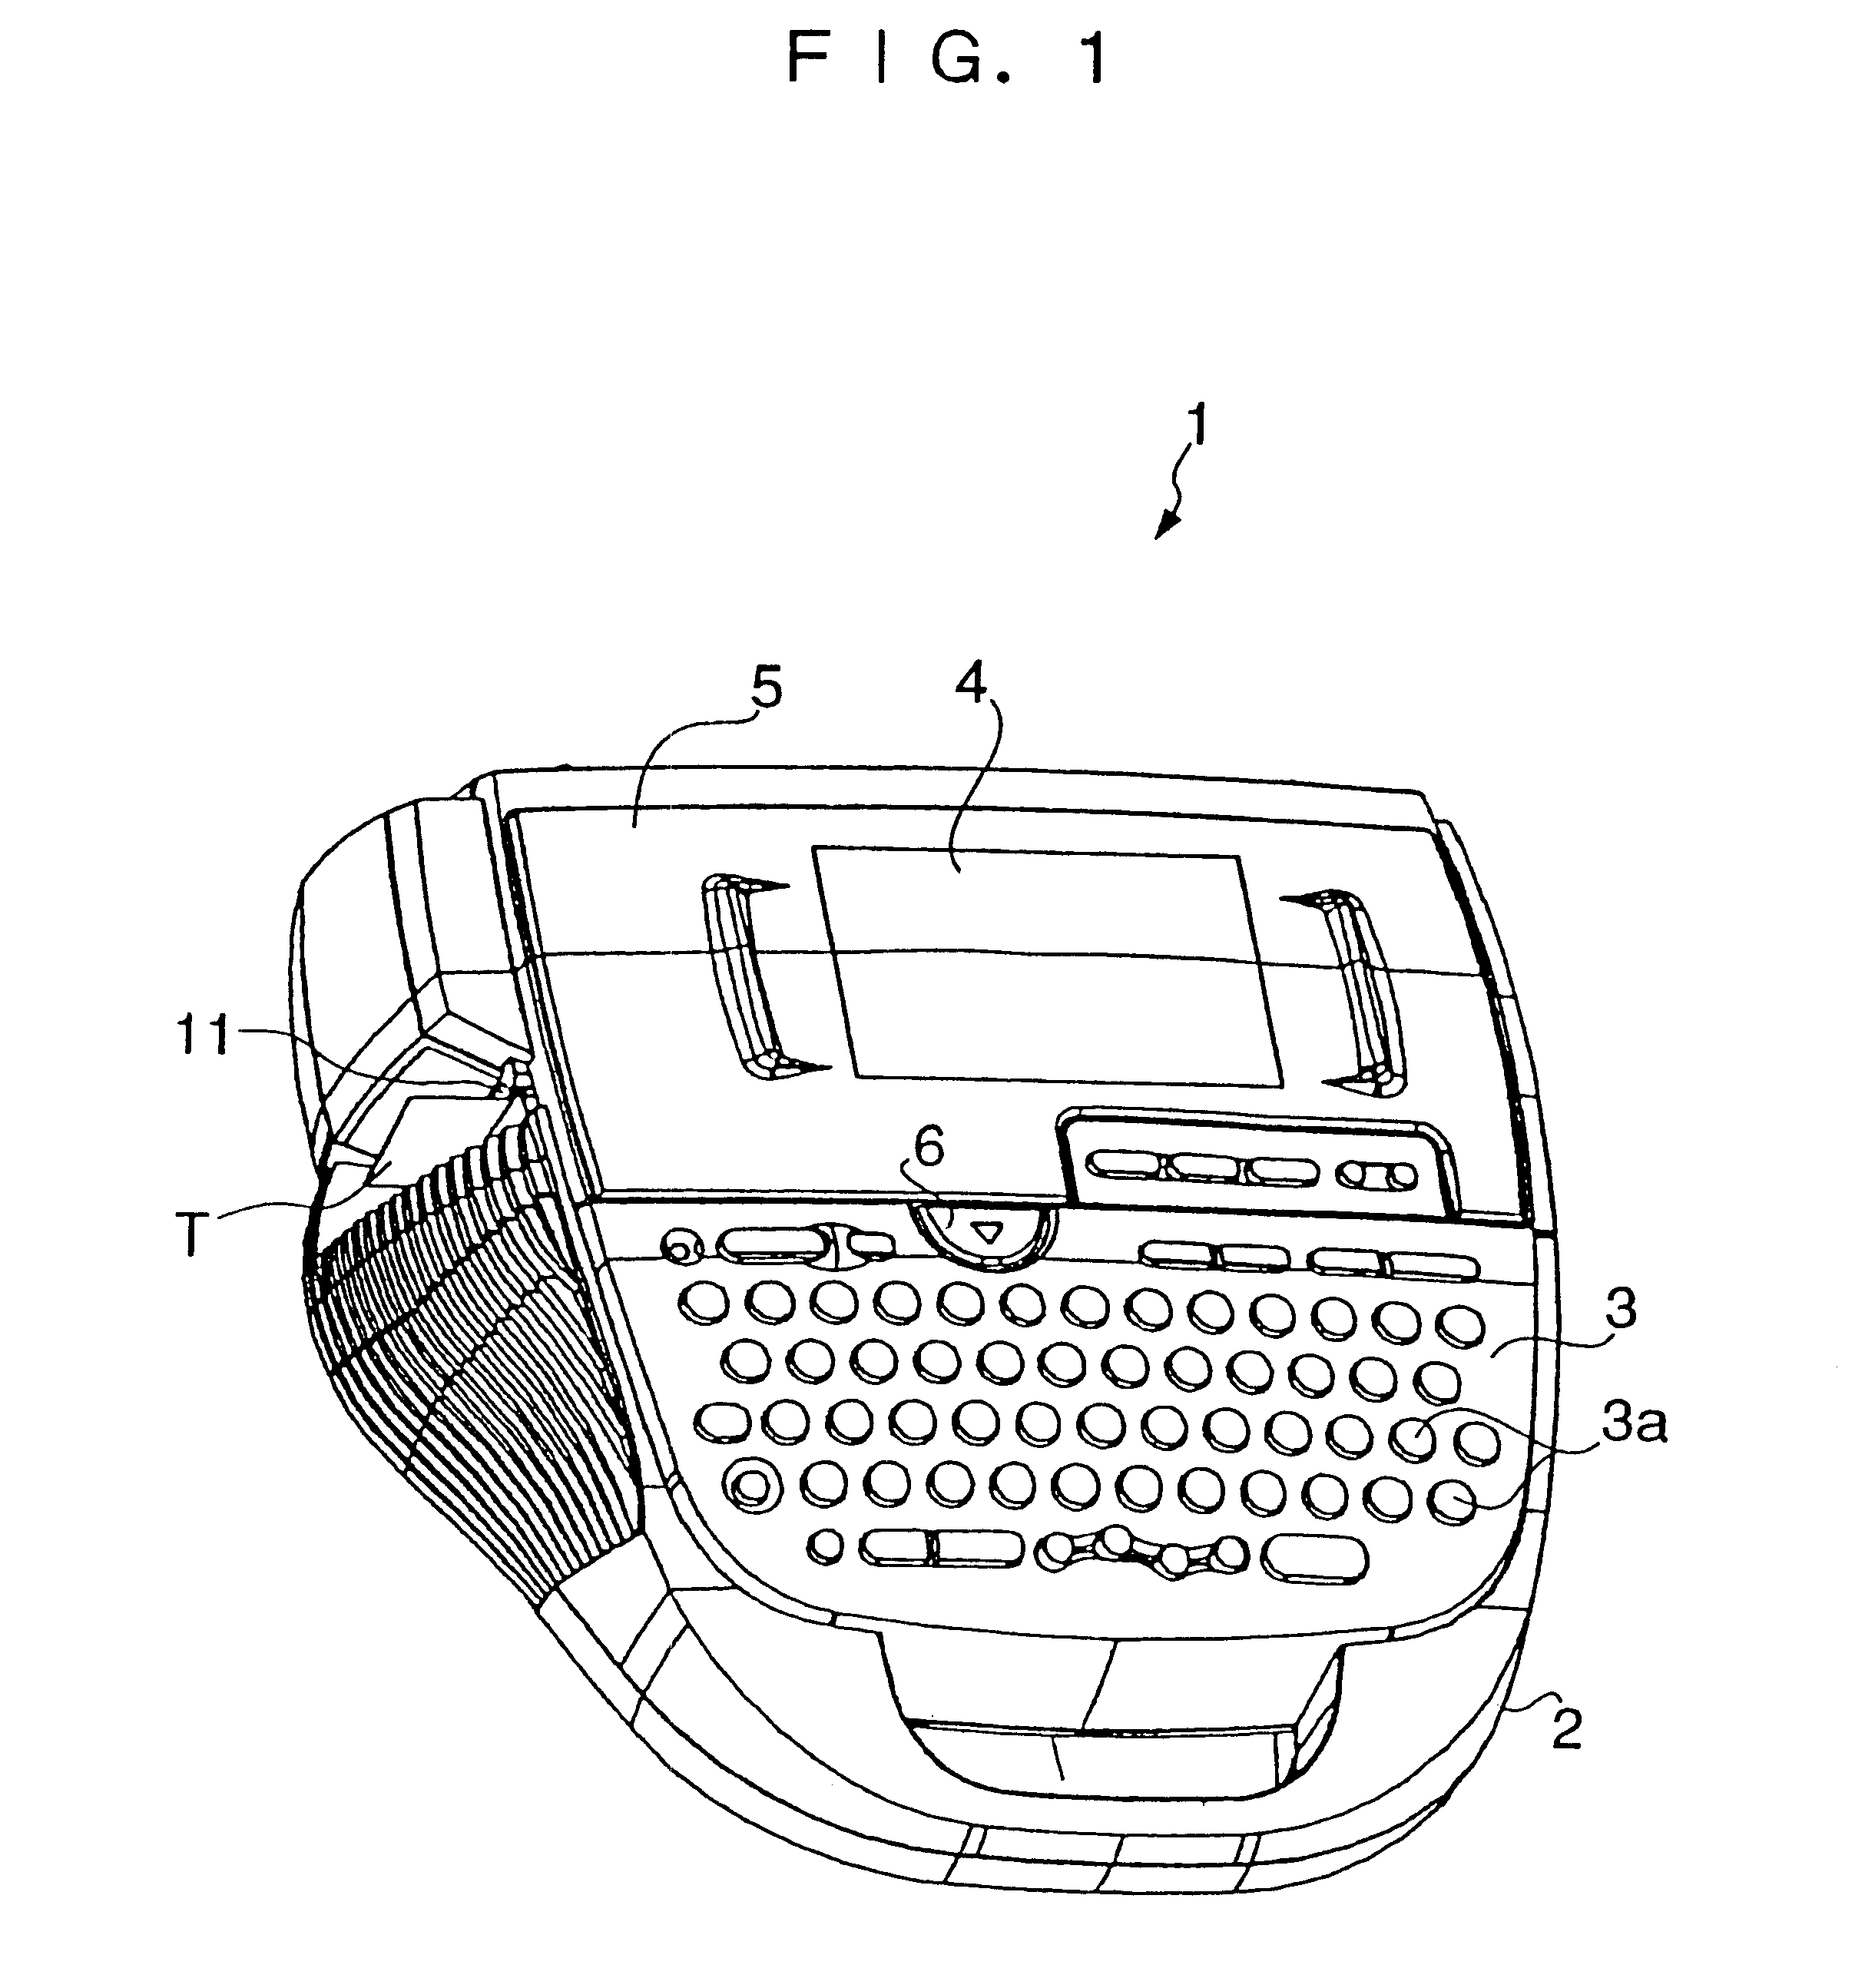 Tape cartridge-holding mechanism and tape printing apparatus including the same